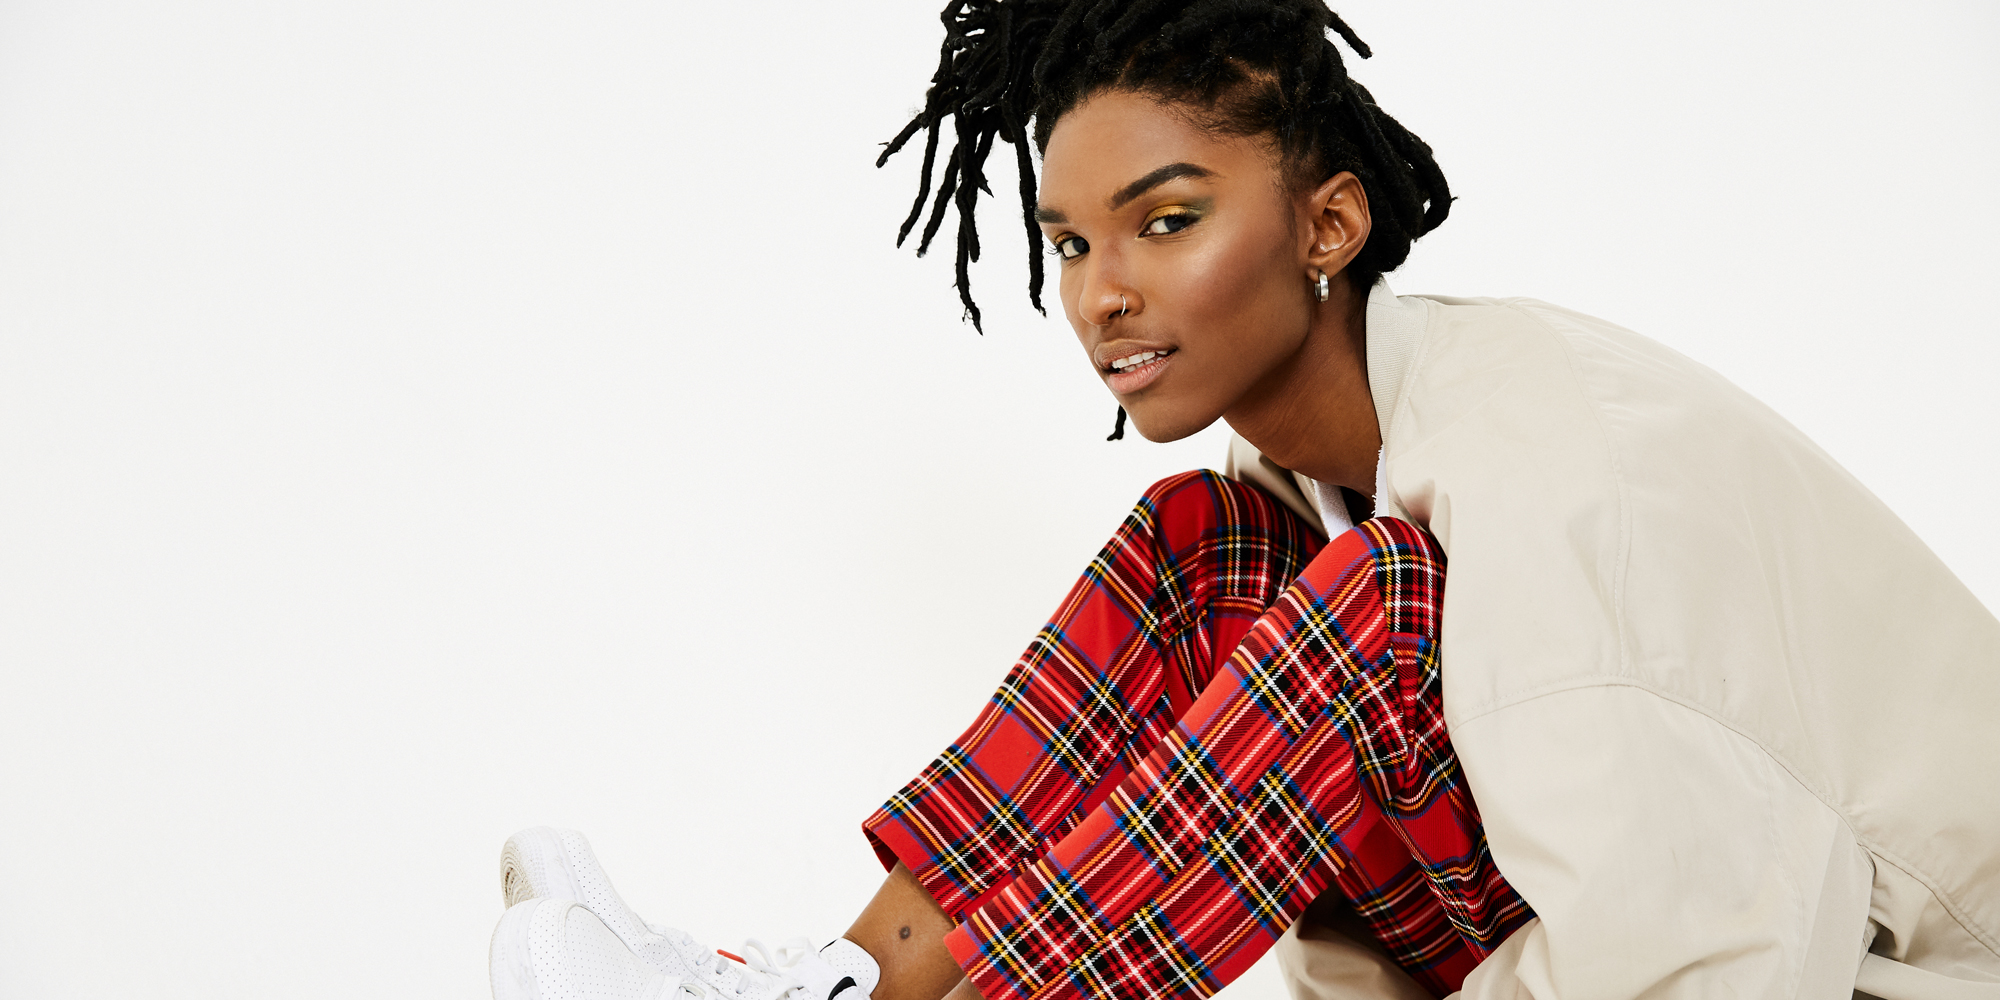 Social Media Star Ari Fitz on Staying Focused and Believing in Herself